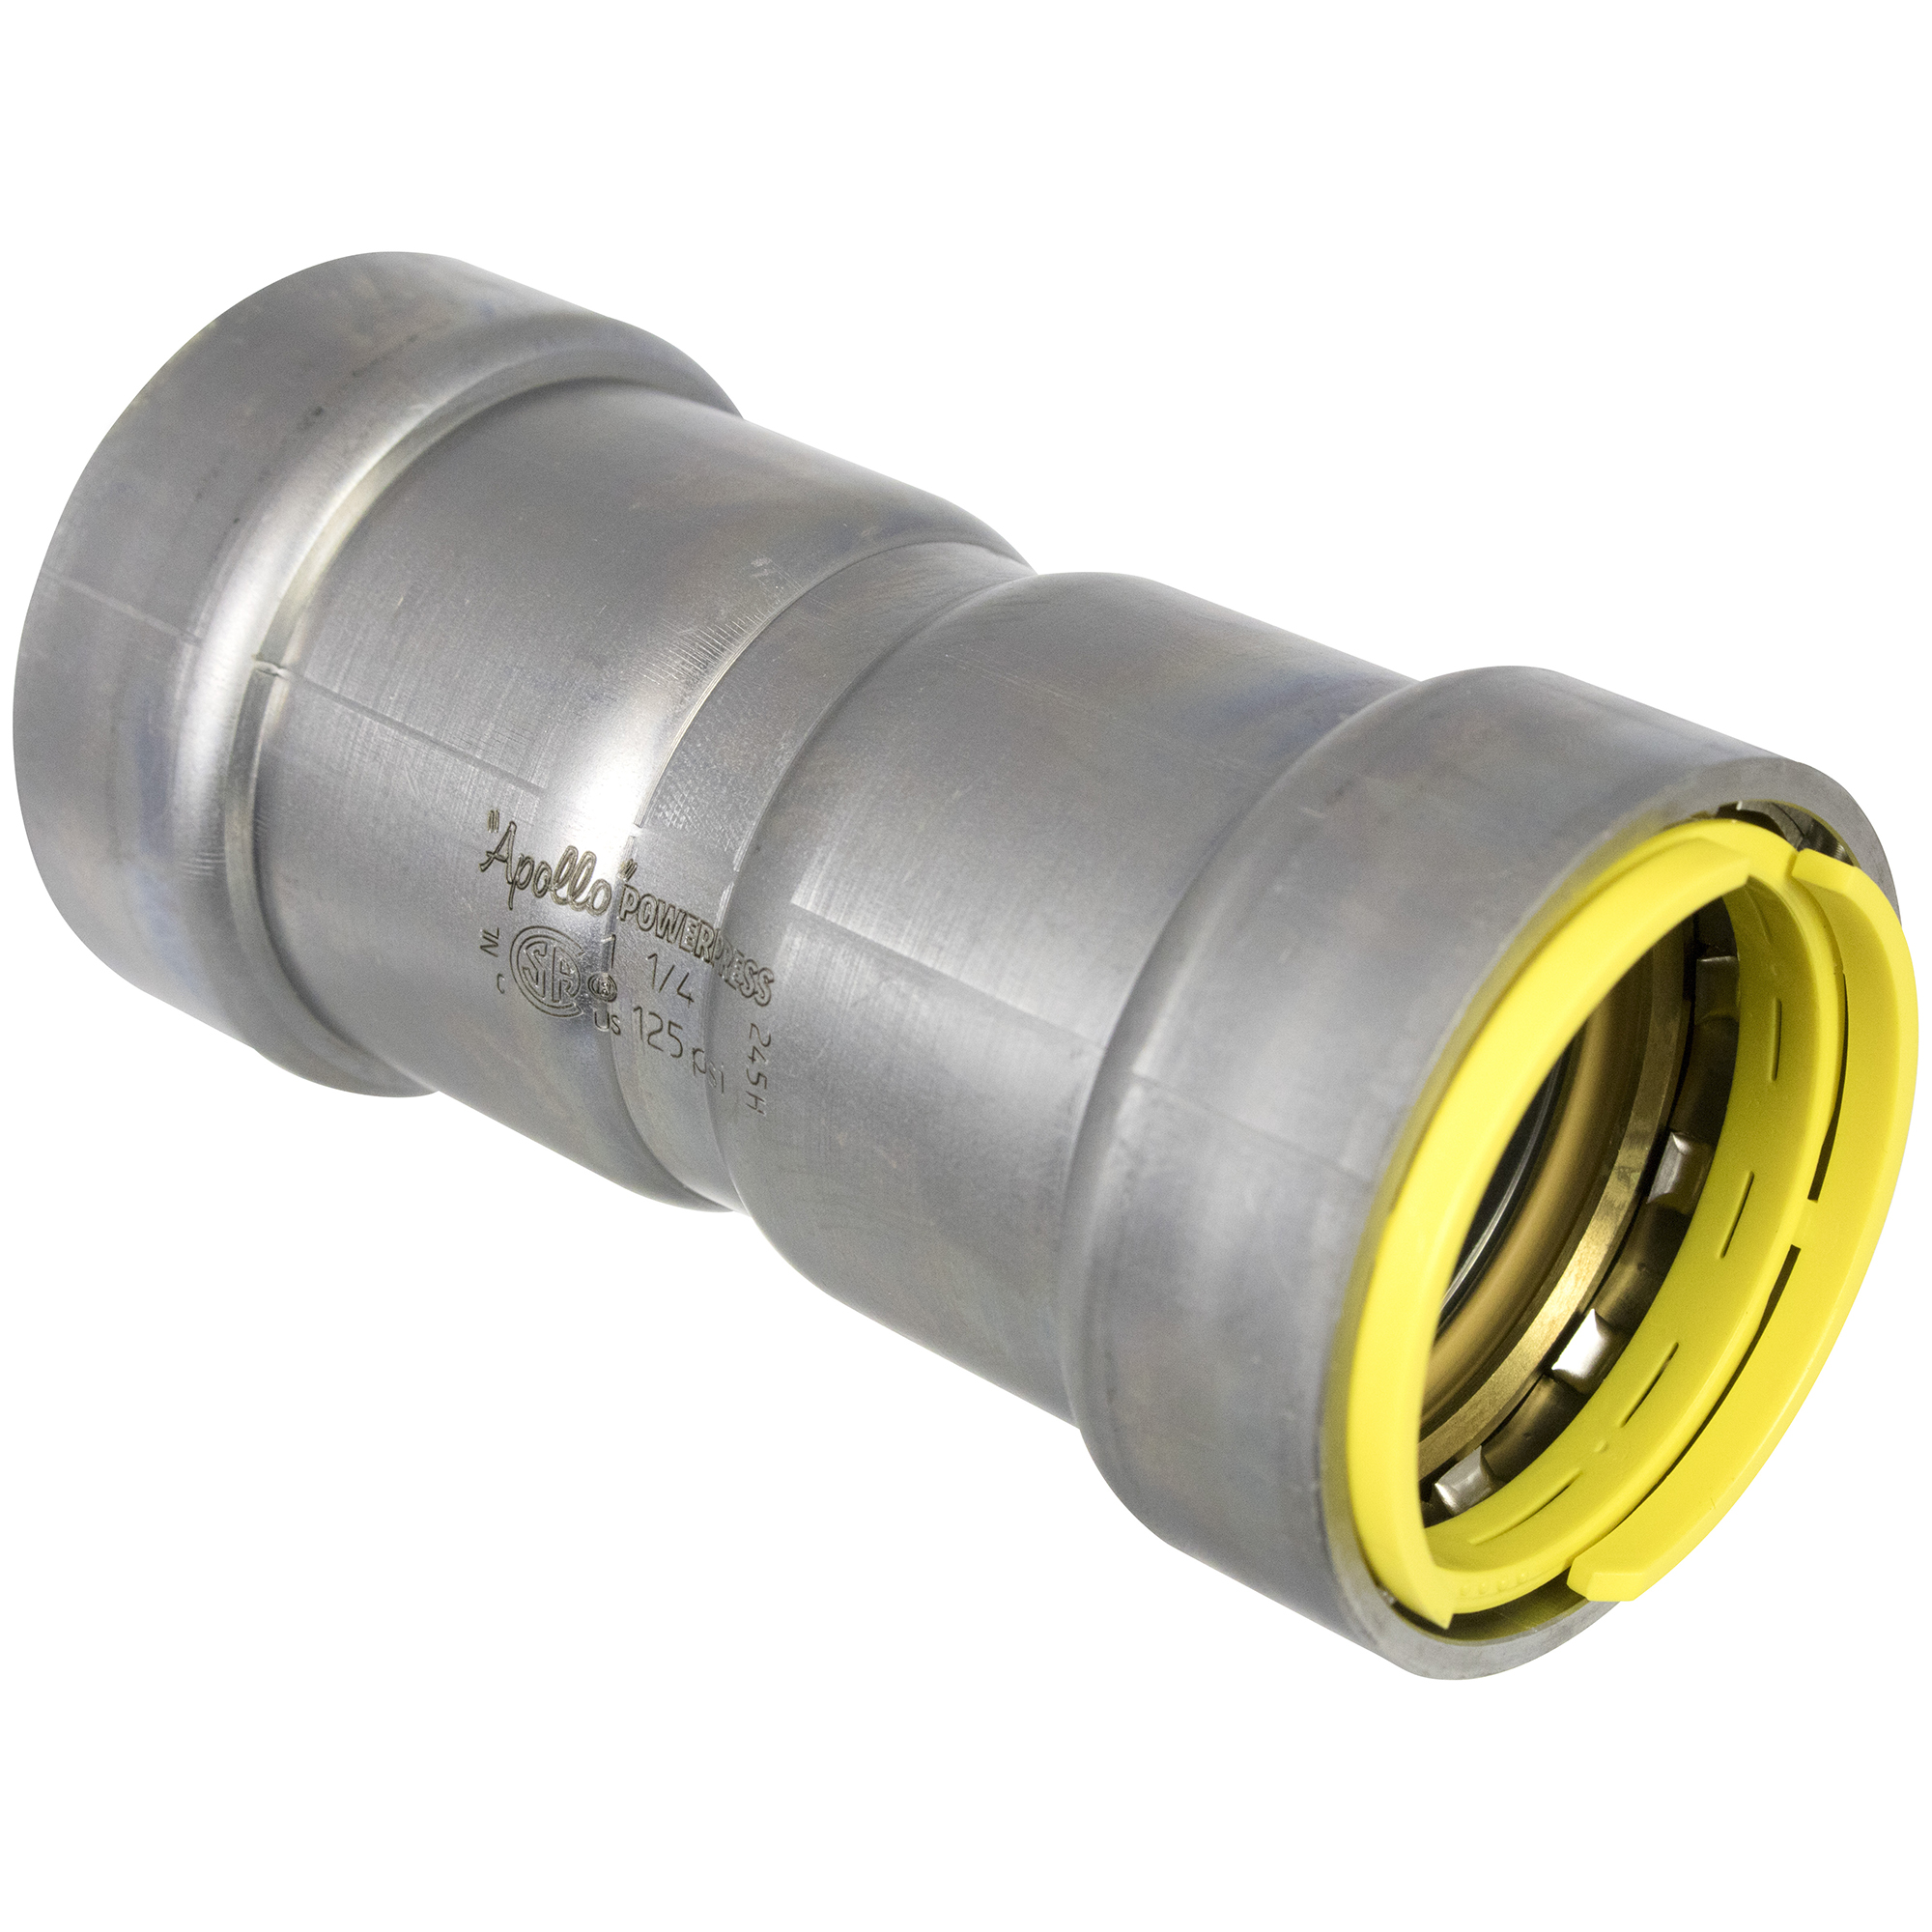 Apollo® PowerPress PWR7481311 400G Coupling With Stop, 1 in, Gas